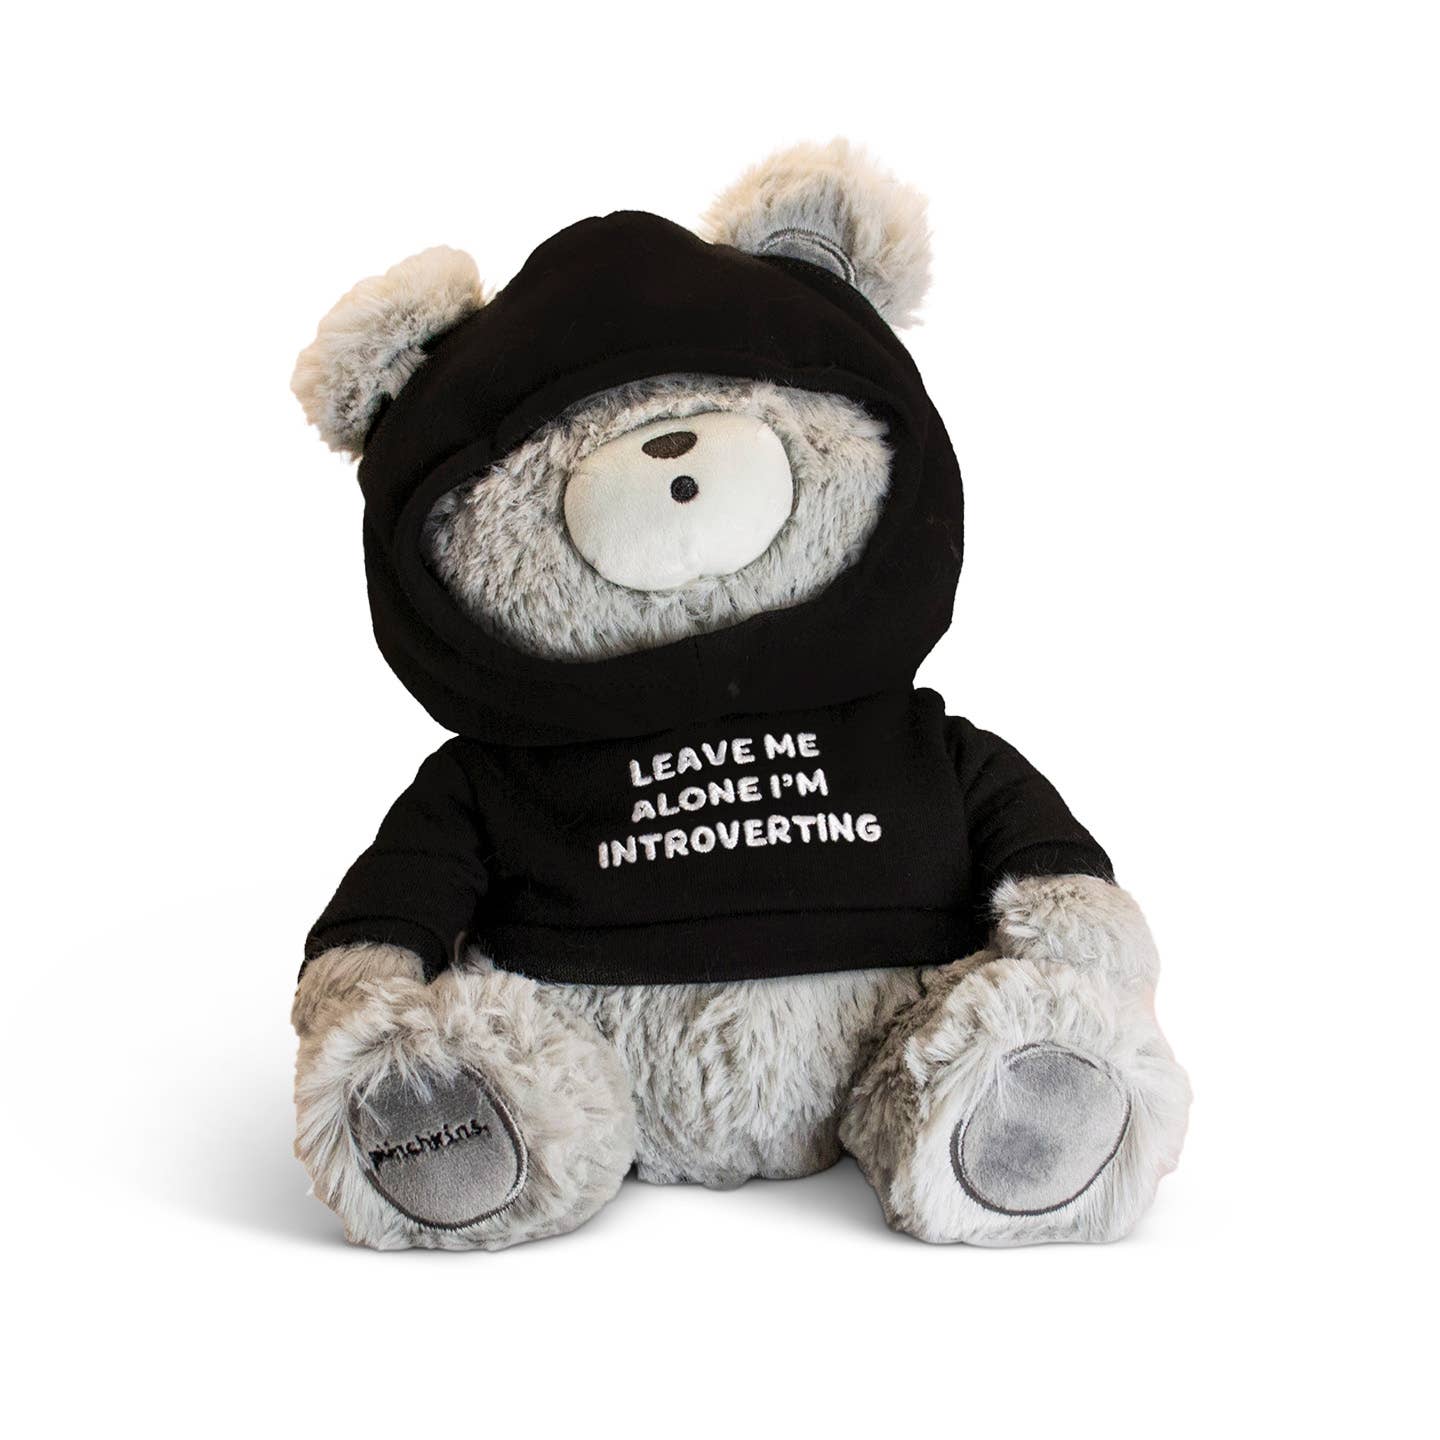 **SALE** "Leave Me Alone, I'm Introverting" Teddy Bear Plushie, Gift